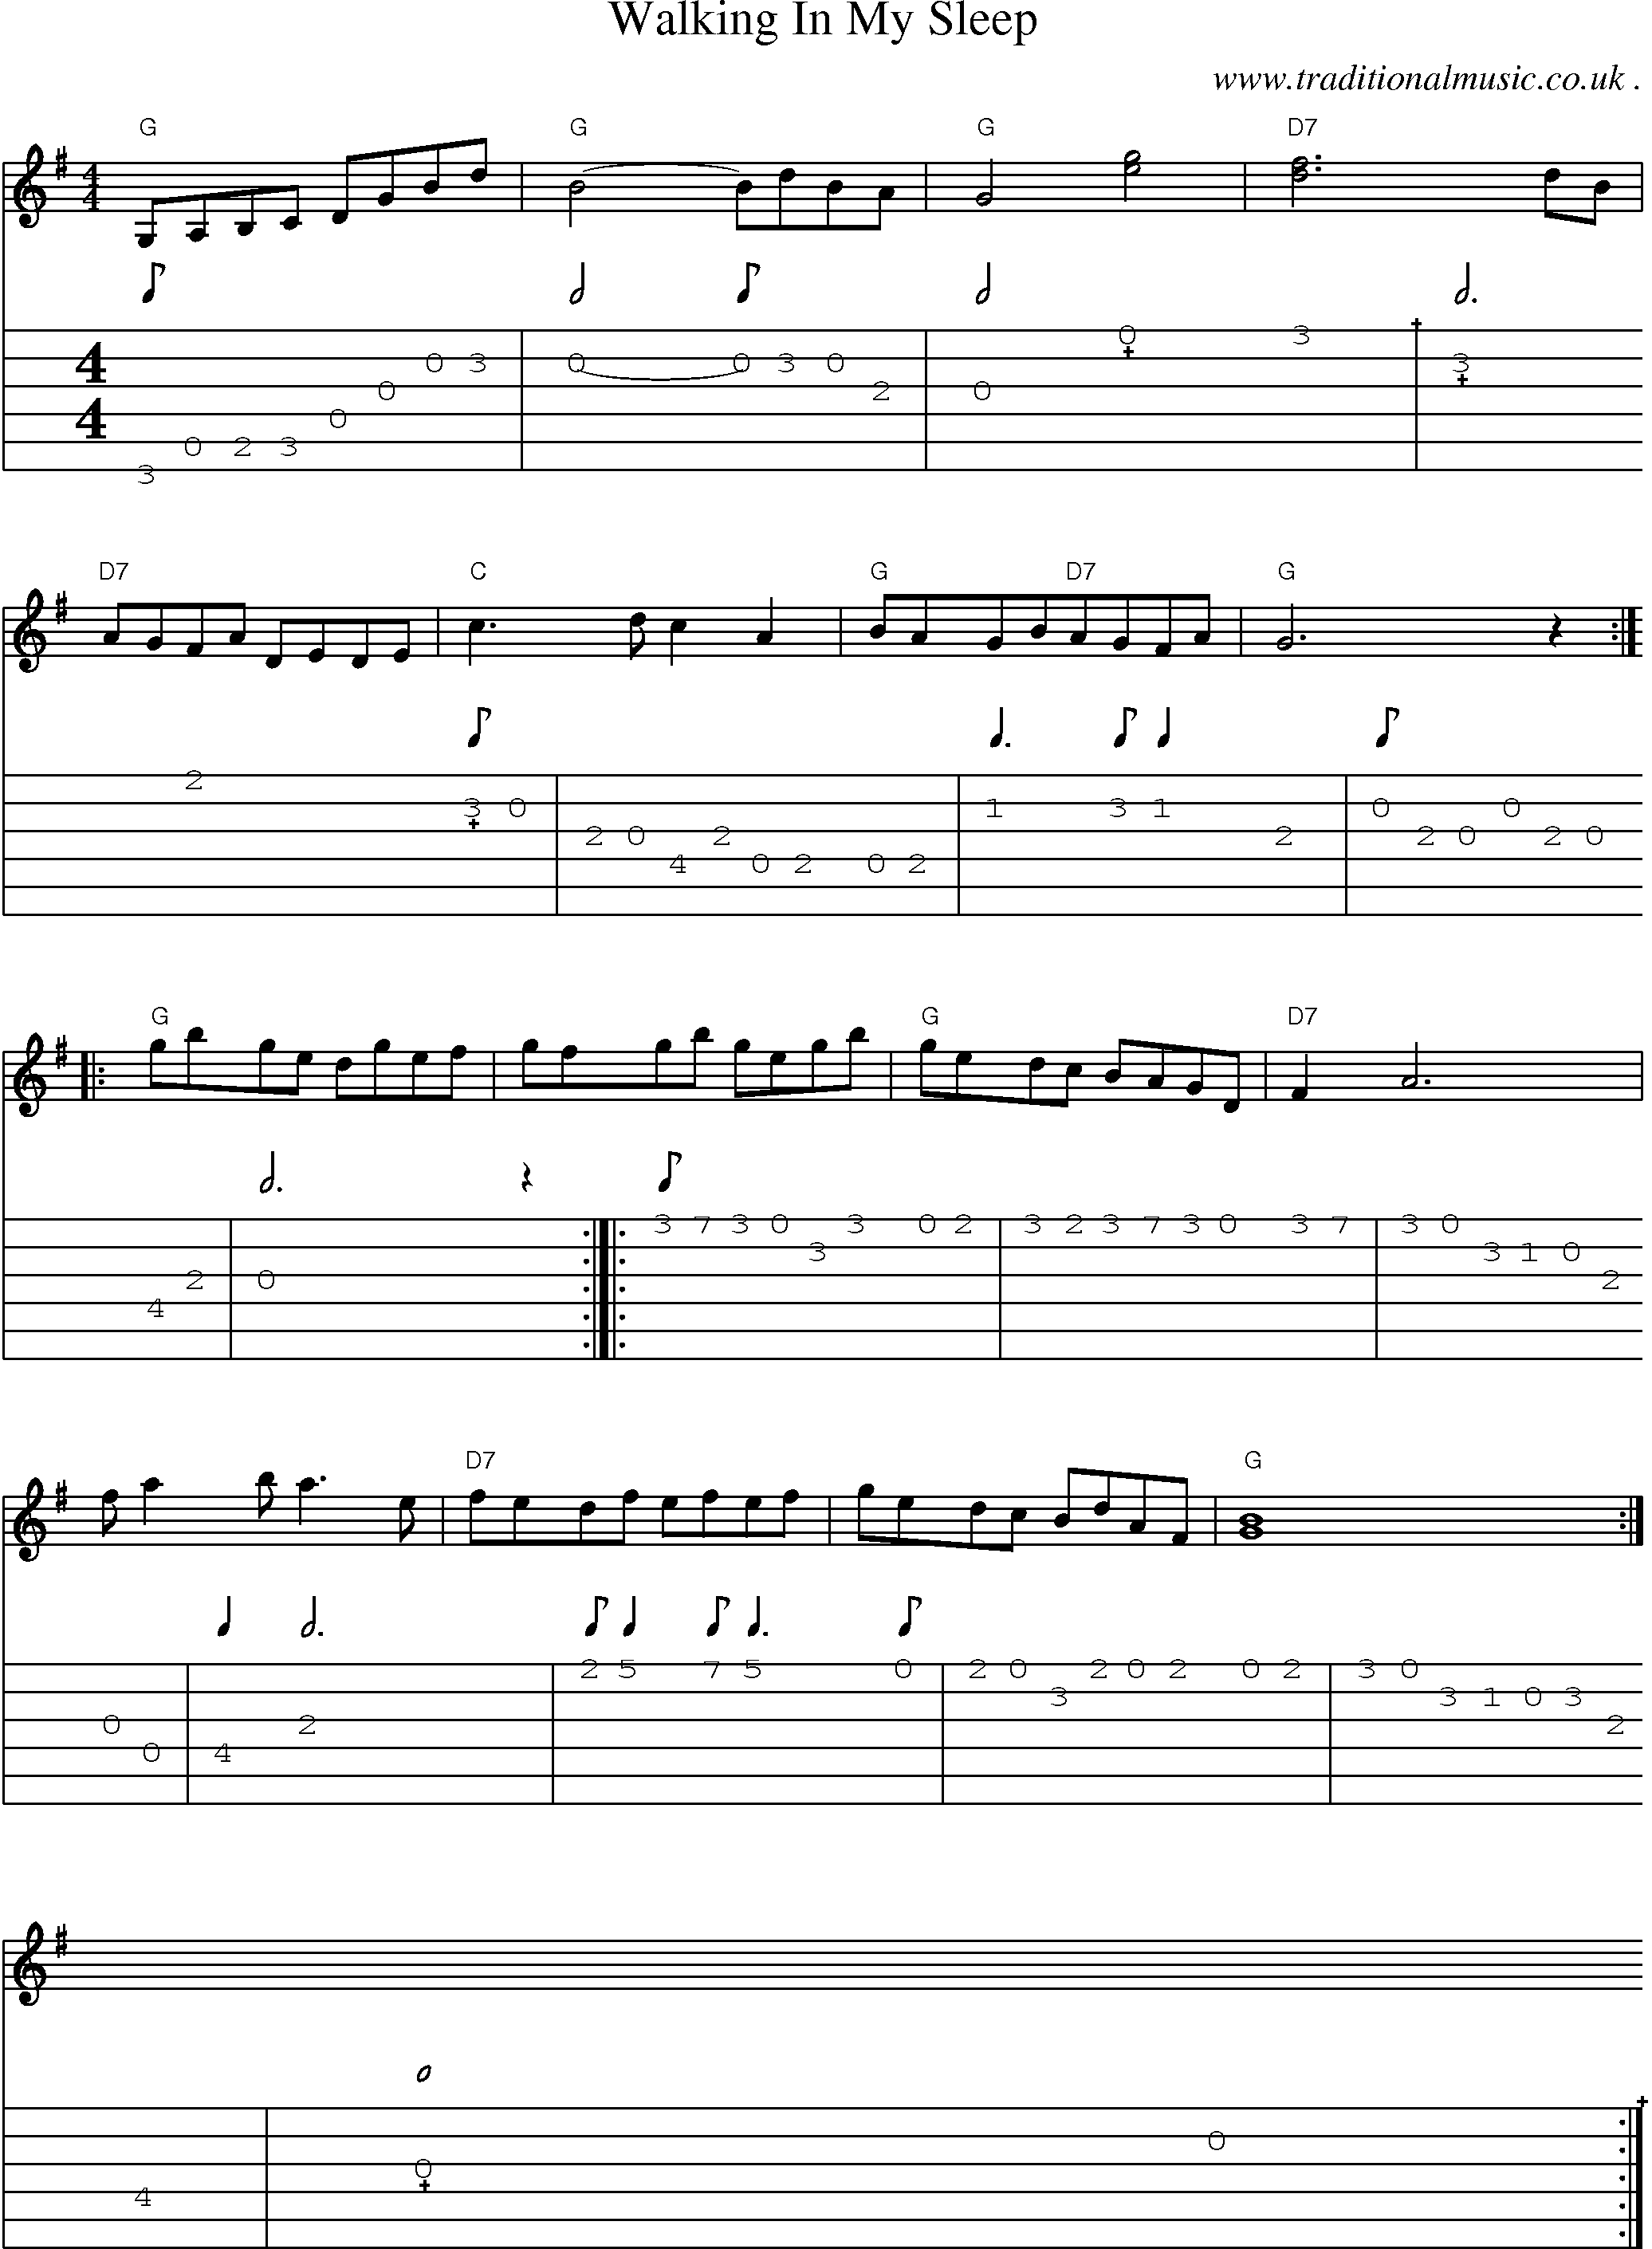 Sheet-Music and Guitar Tabs for Walking In My Sleep